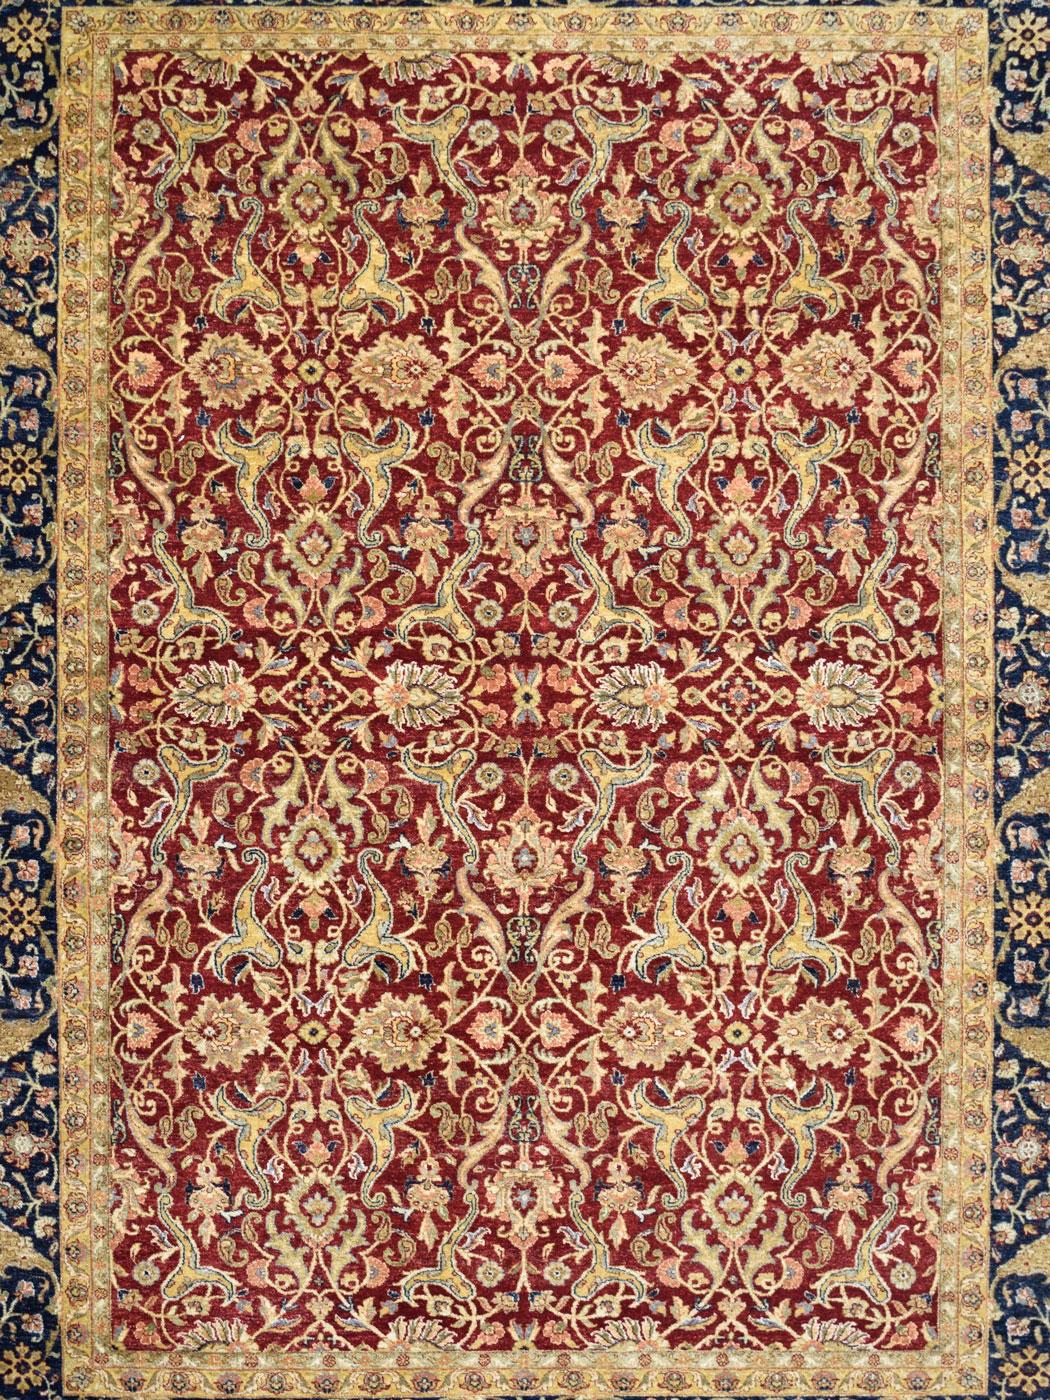 Are you looking for the perfect formal carpet for your Tudor, Victorian, or Colonial-styled home? Look no further than this Lavar carpet, measuring 6’1” x 8’10” and hand-knotted in red, taupe, indigo, gold, and pink wool. Woven in India, this carpet